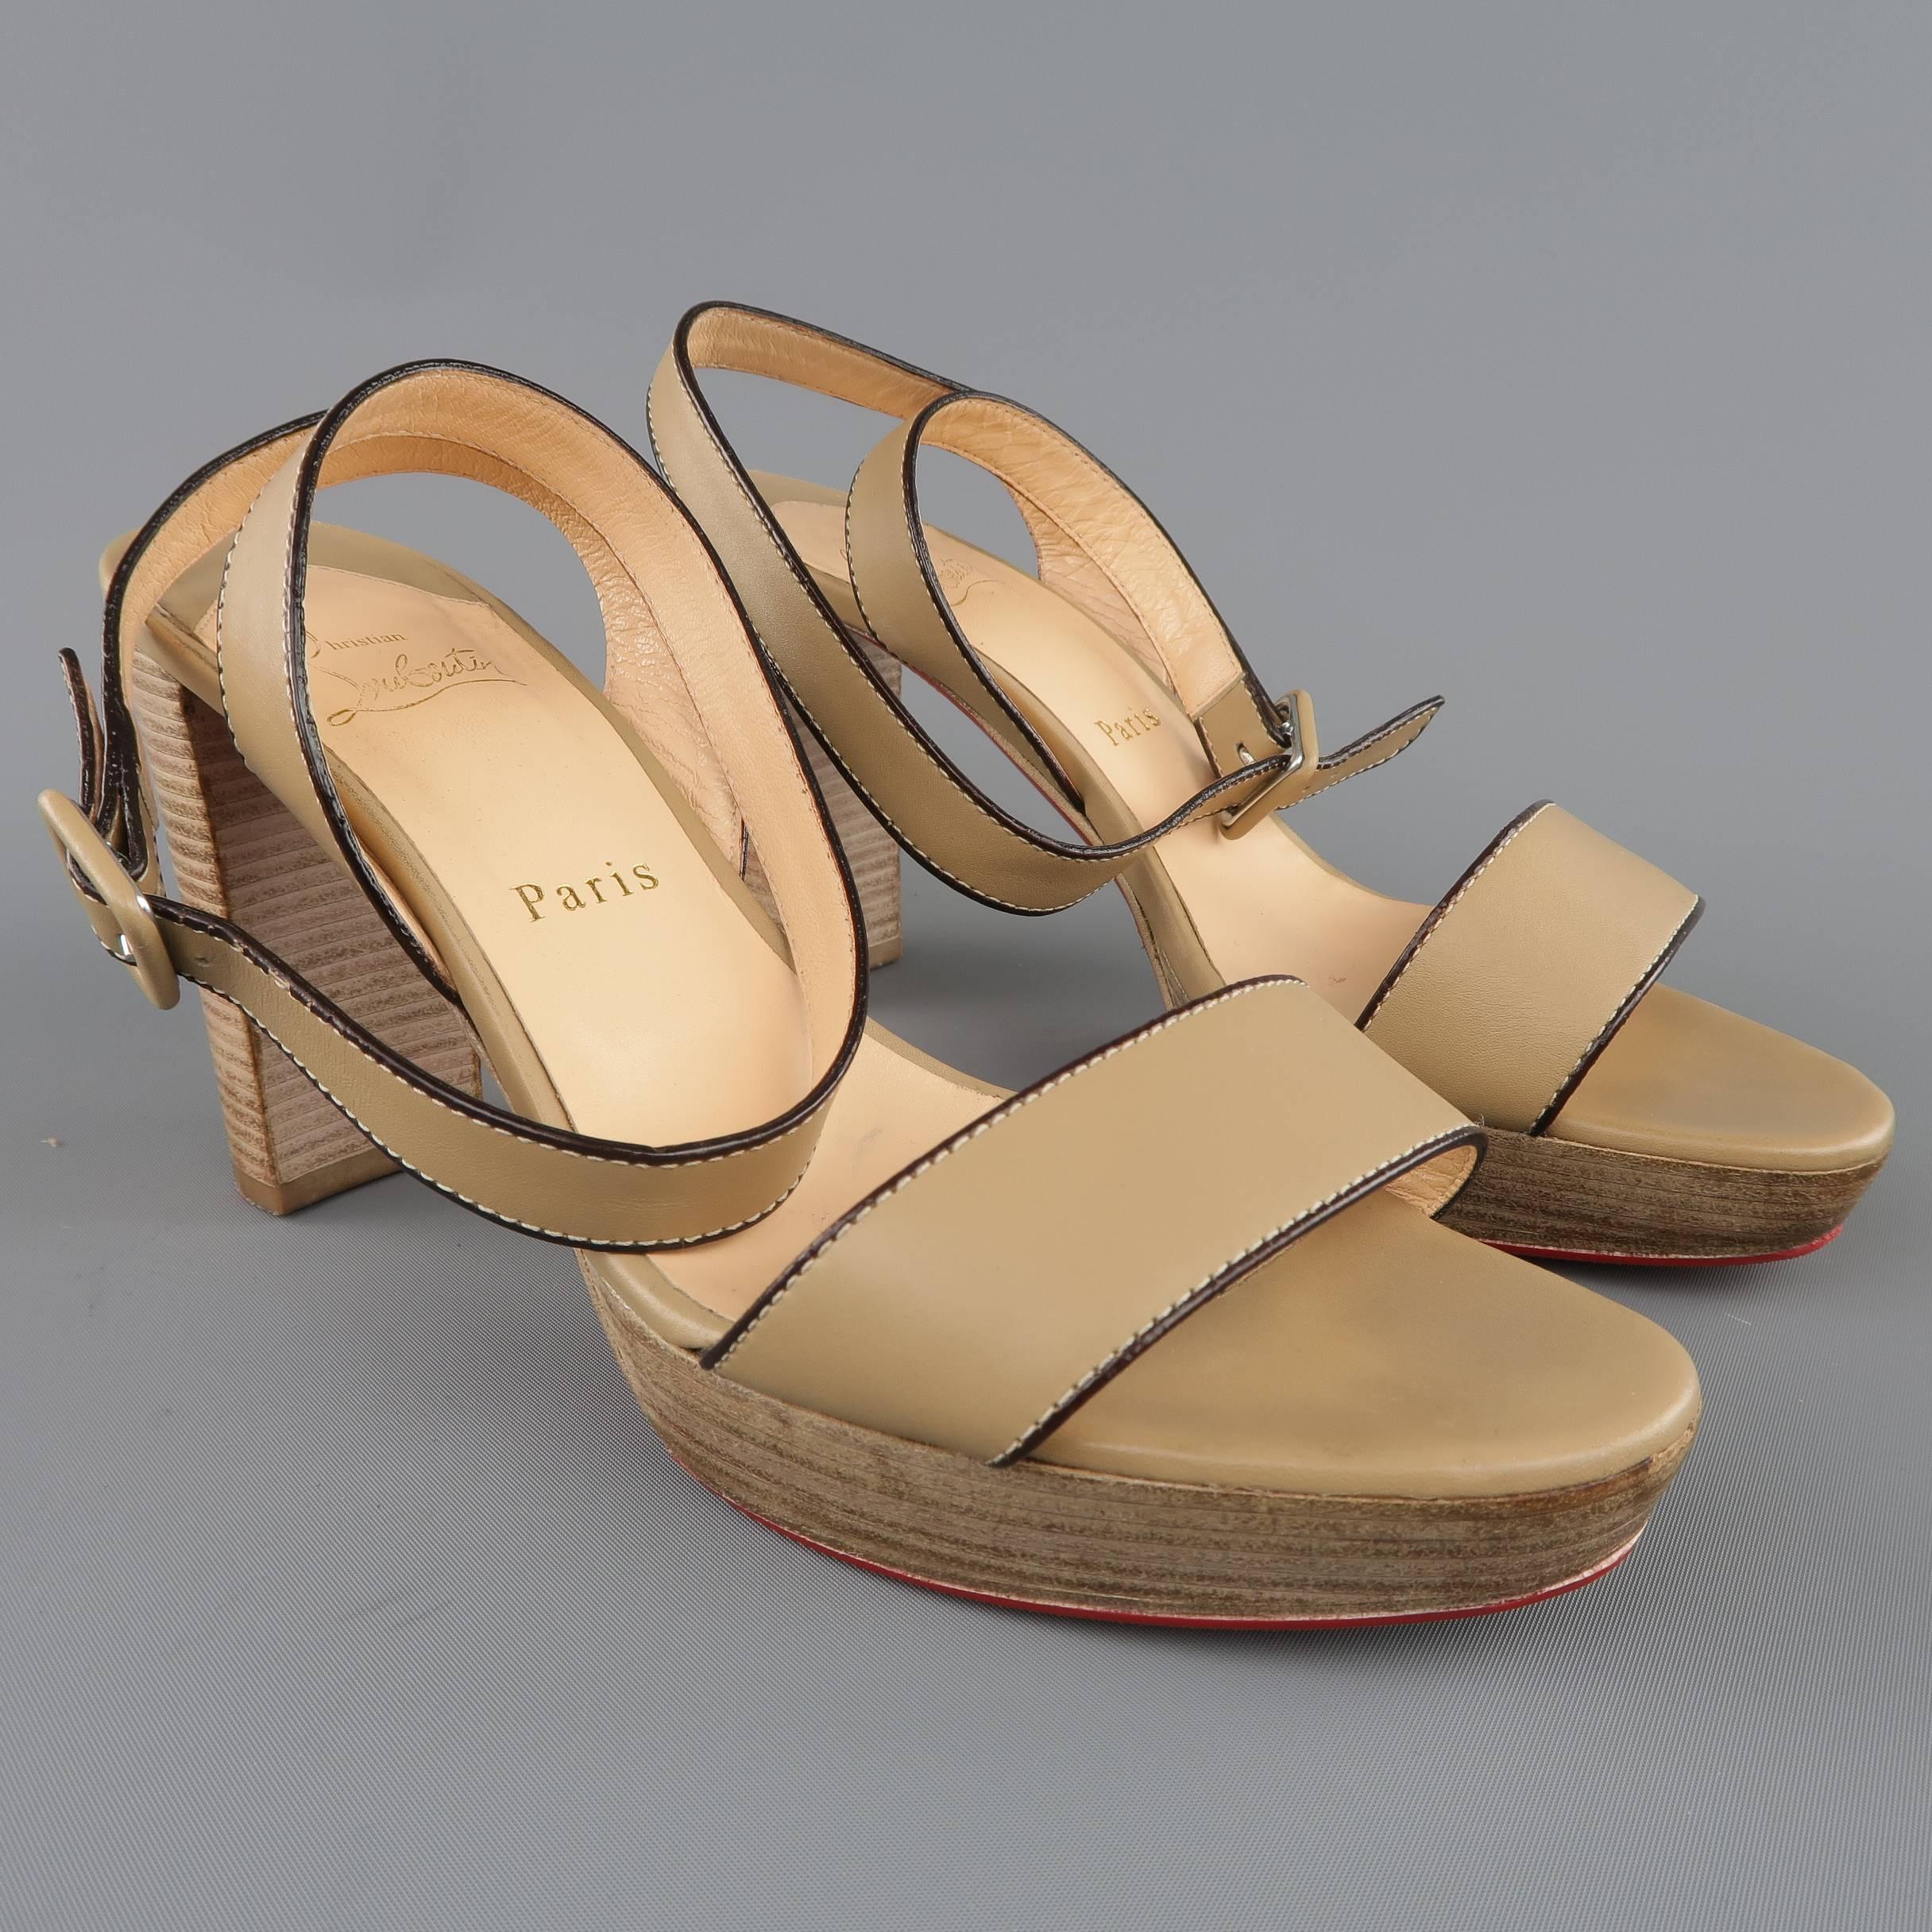 CHRISTIAN LOUBOUTIN sandals come in taupe beige smooth leather with dark brown piping and feature a wrapped ankle strap and chunky, stacked platform and heel. With box. Made in Italy.
 
Good Pre-Owned Condition.
Marked: IT 39
 
Measurements:
 
Heel: